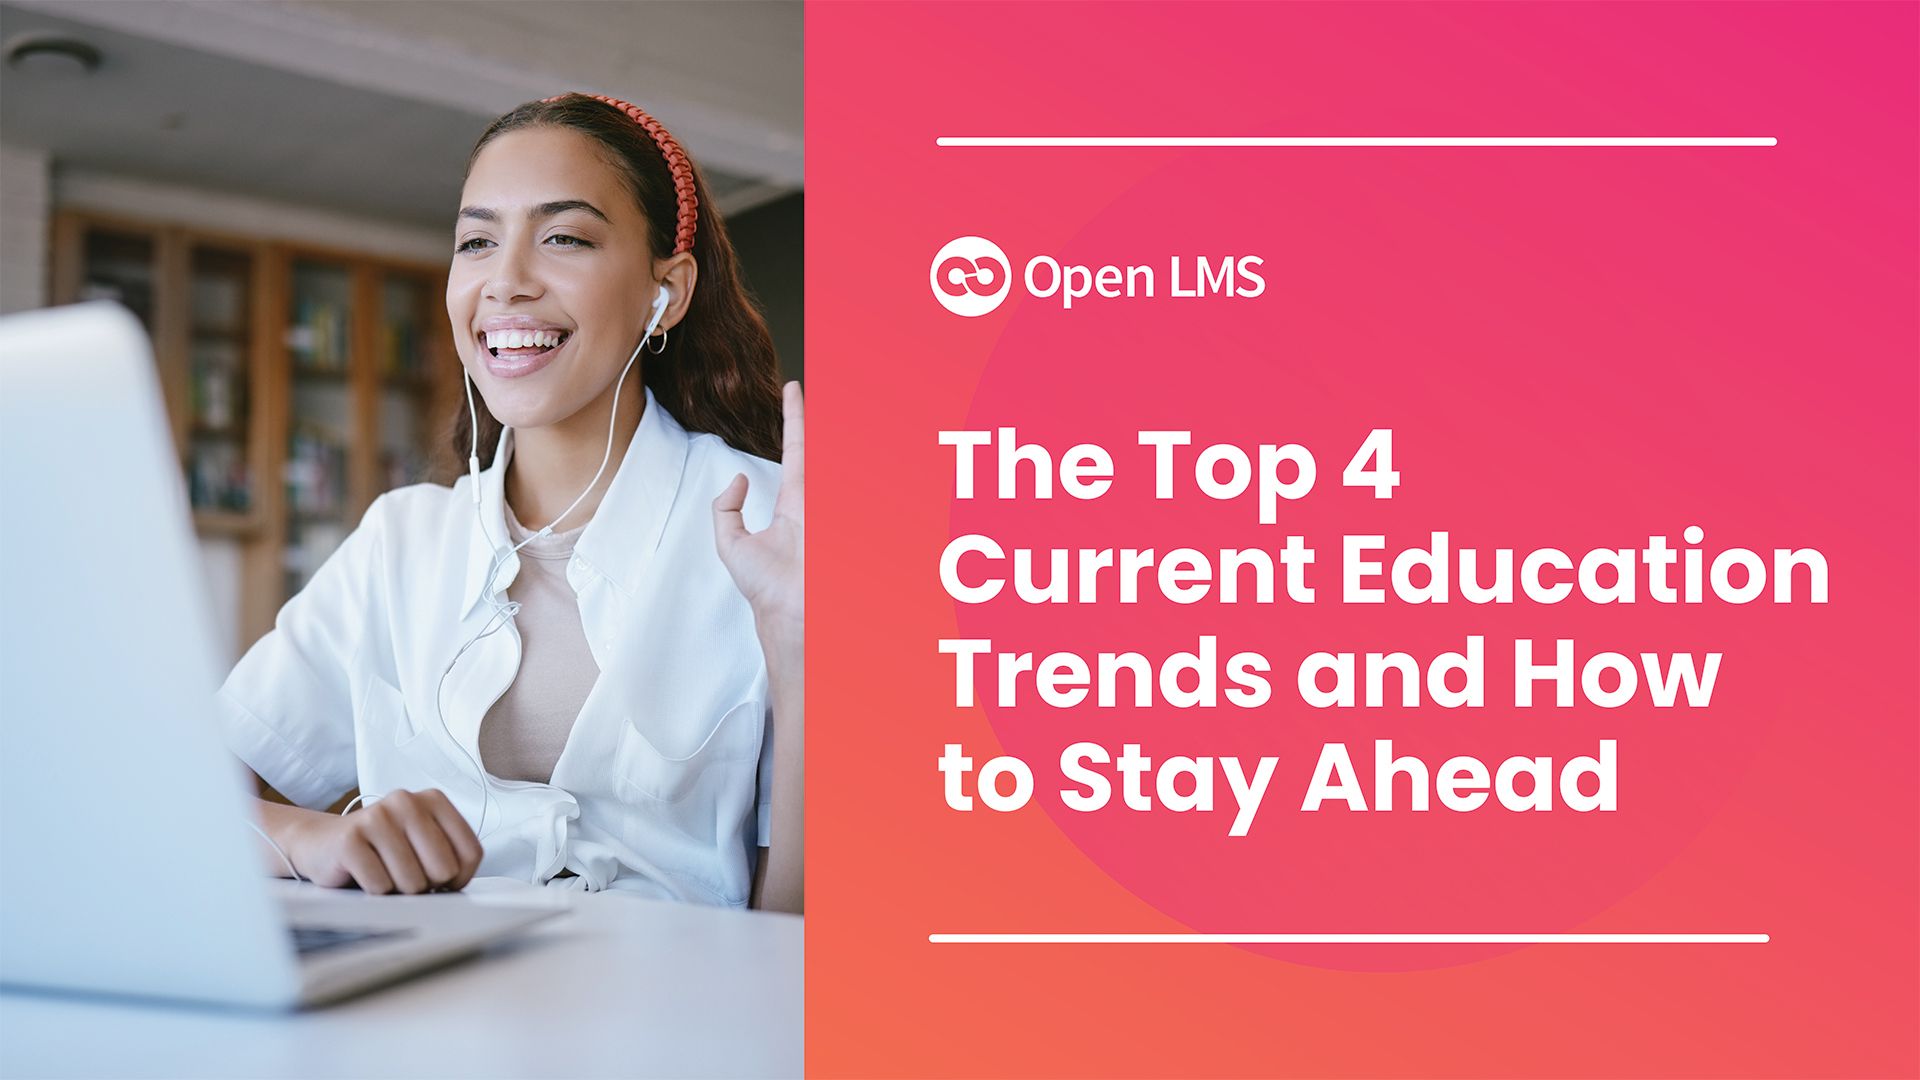 The Top 4 Current Education Trends and How to Stay Ahead